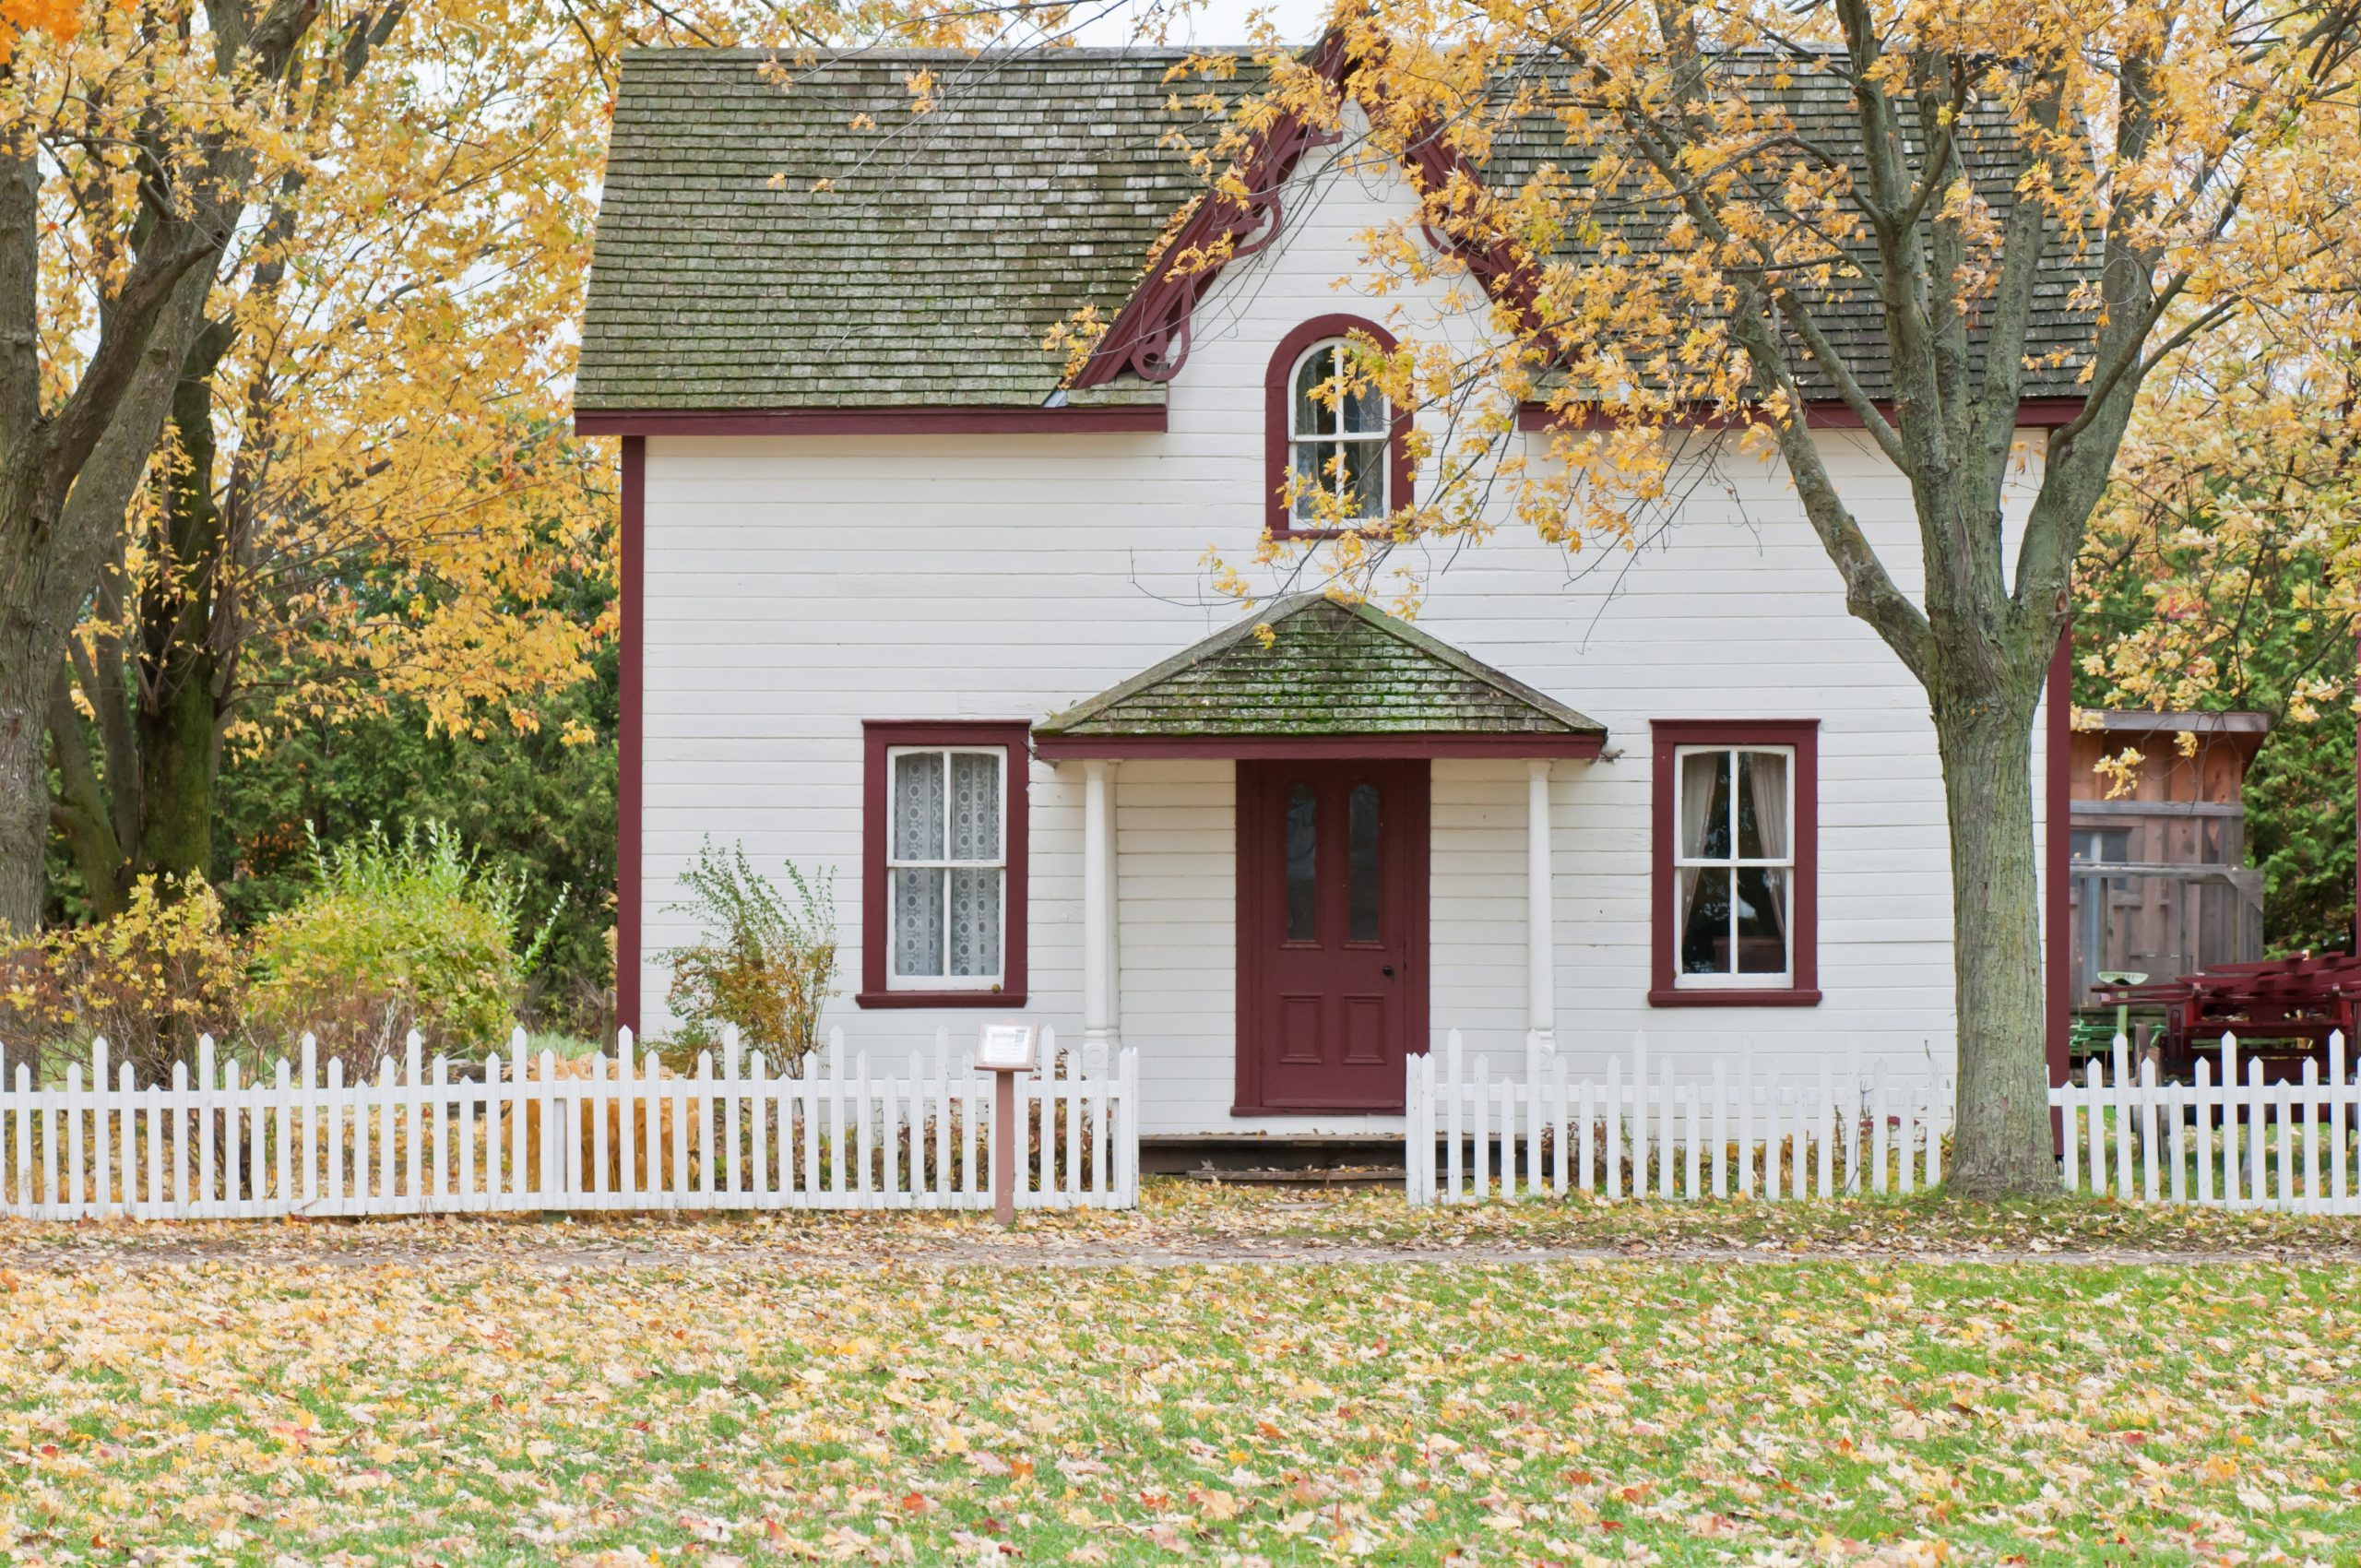 Exterior of a red and white house with many leaves on the ground during Fall